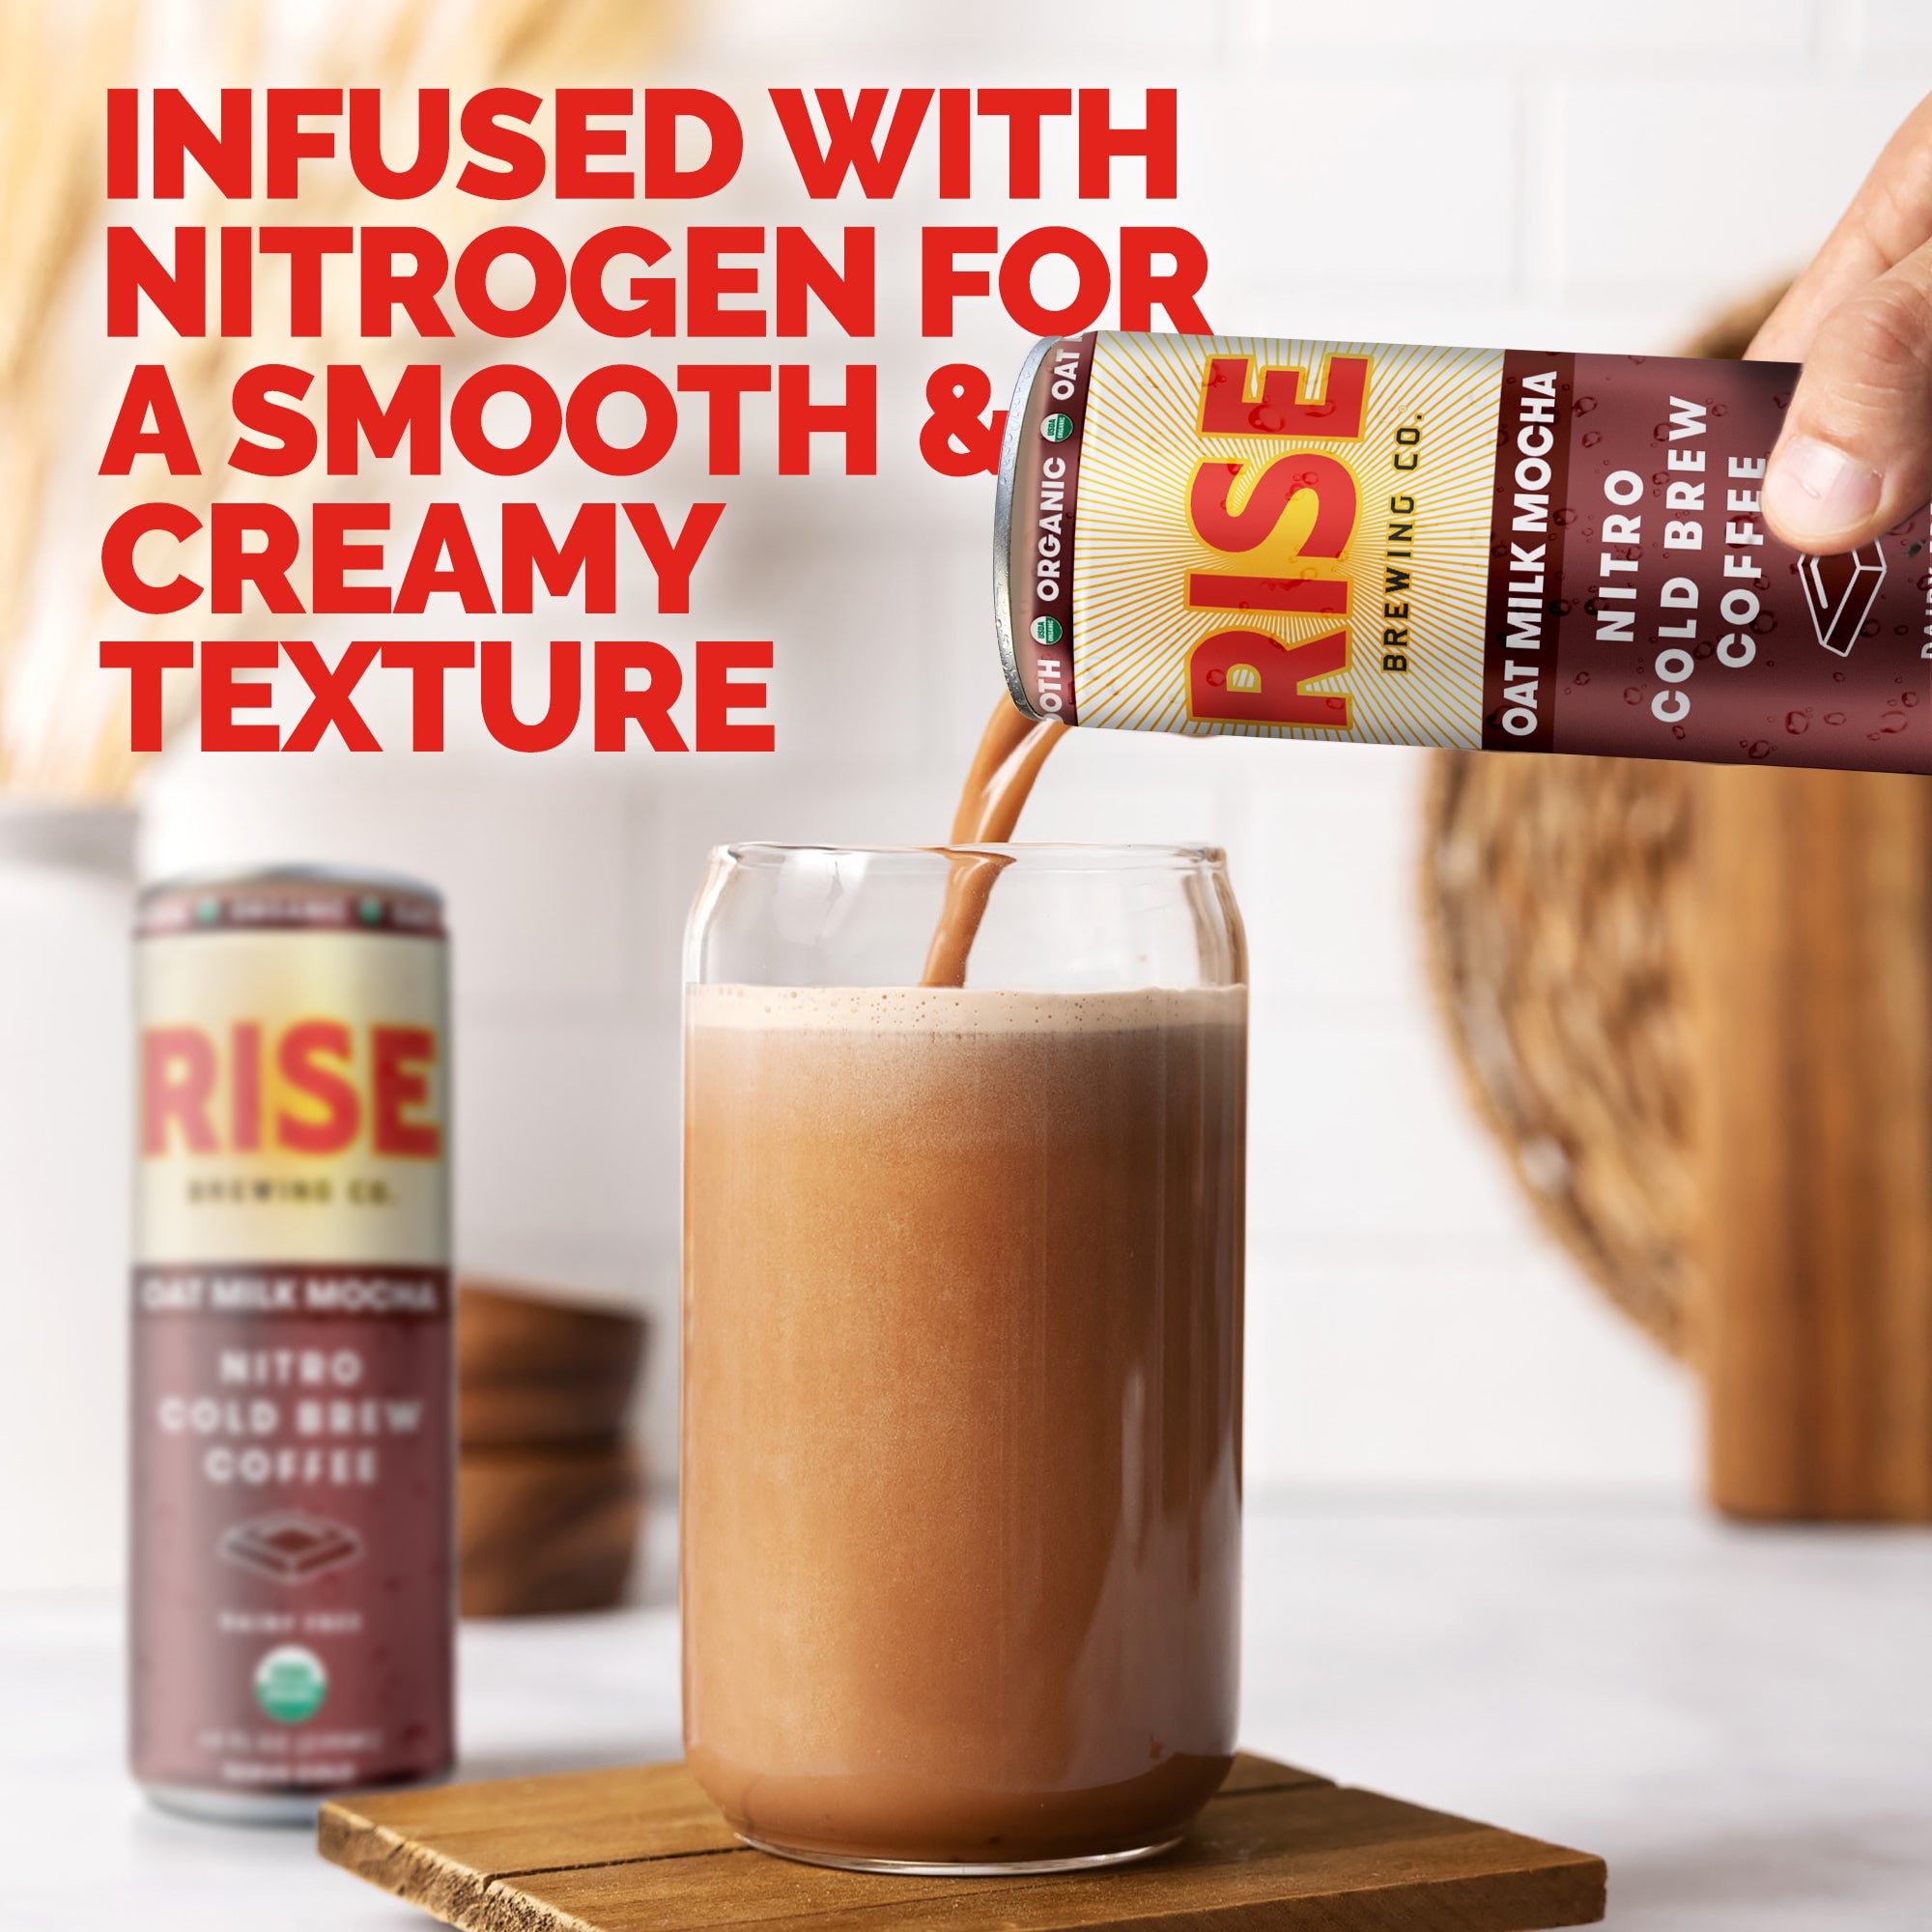 Infused with nitrogen for a smooth & creamy texture